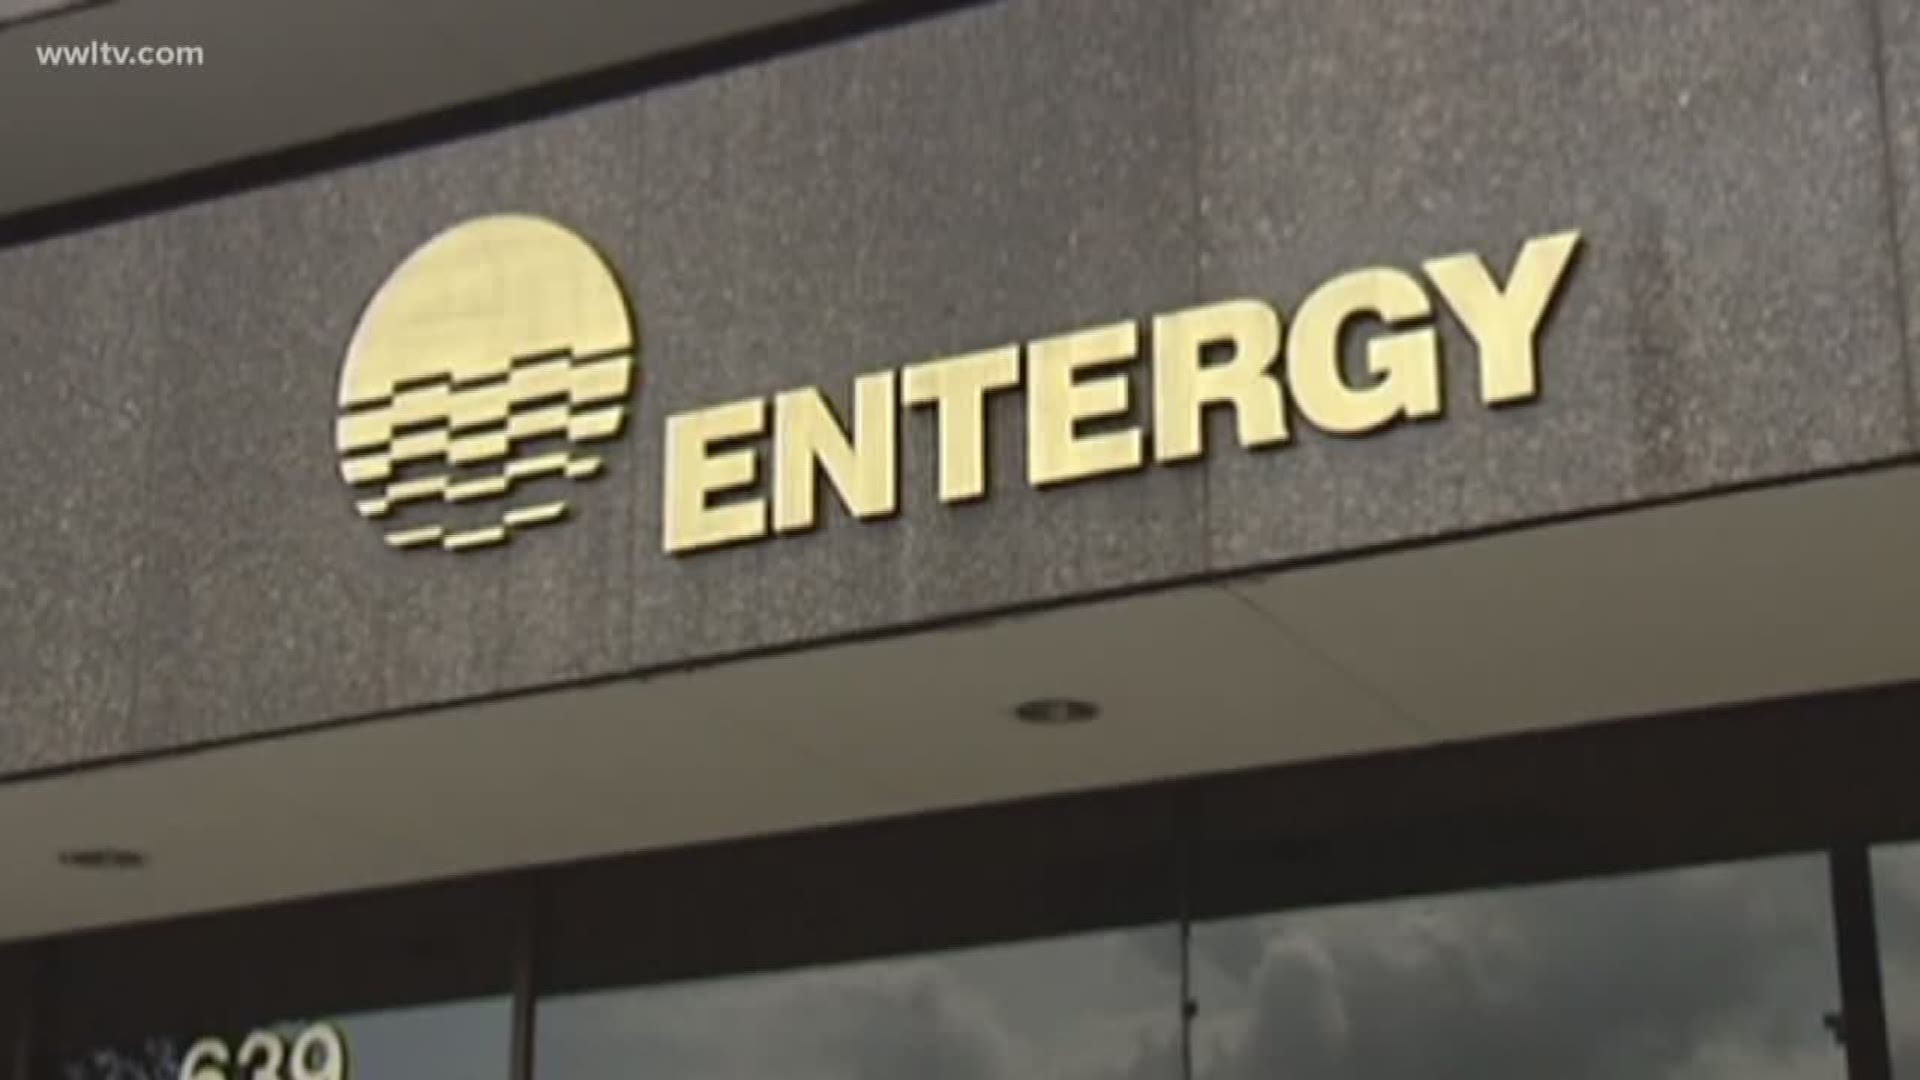 'Many of these organizations need these donations,' said a lawyer challenging Entergy.